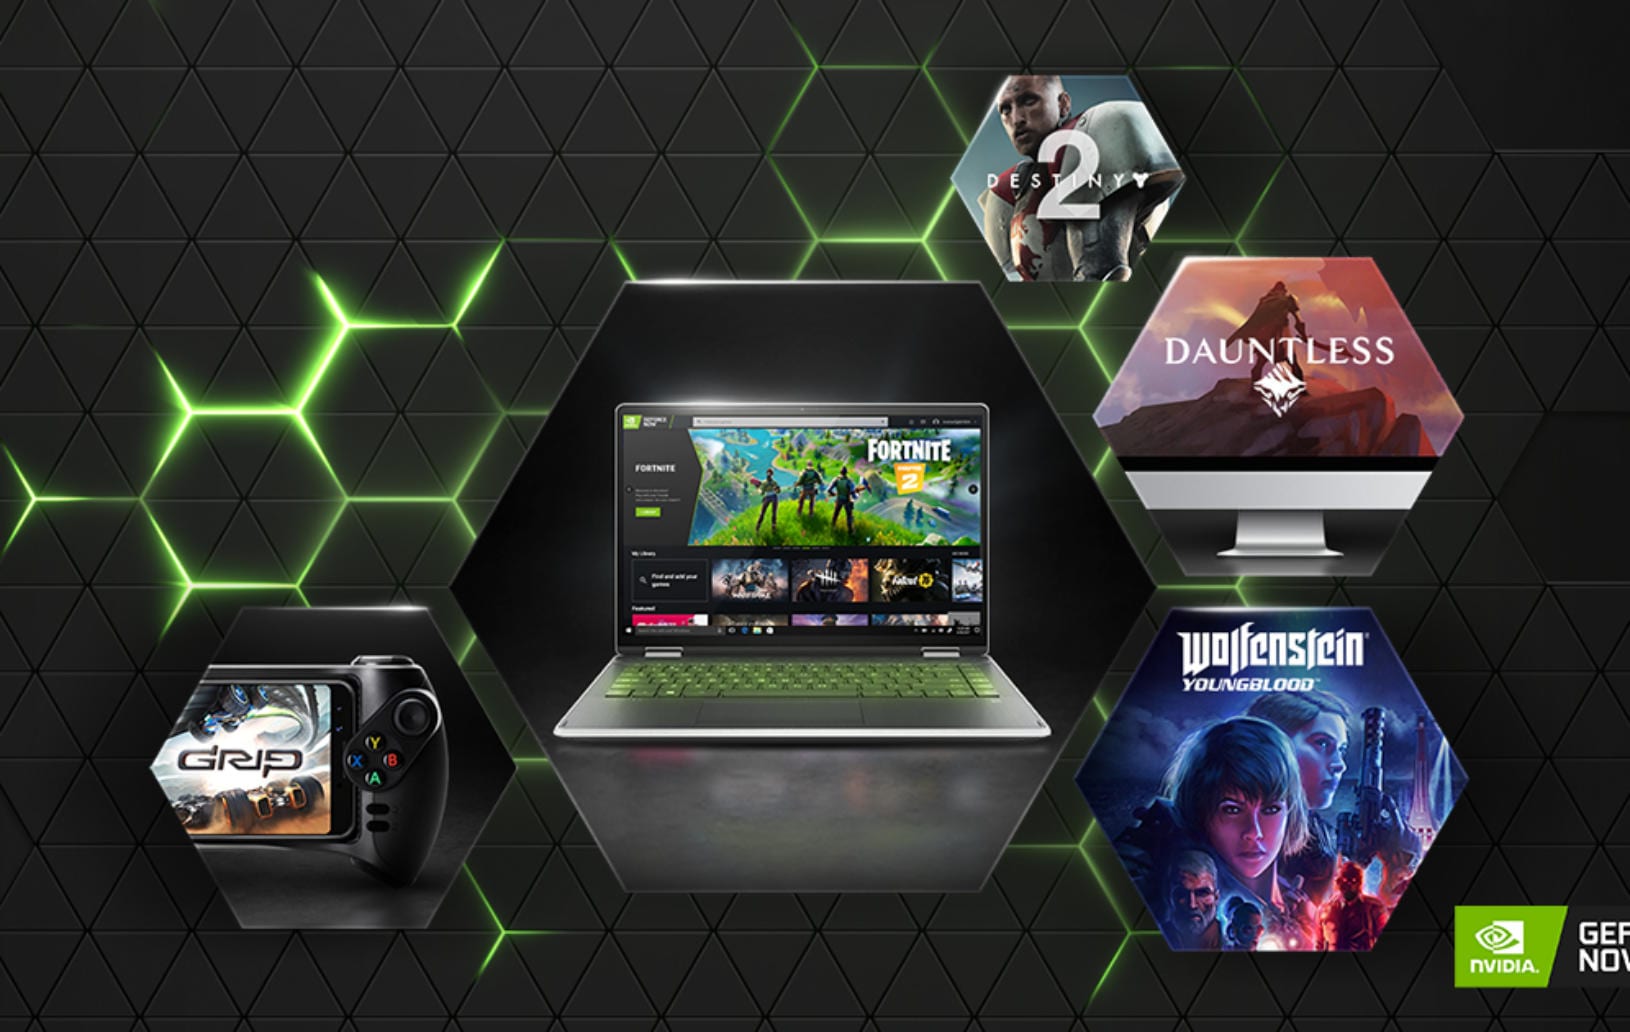 nvidia geforce now looking for next available rig